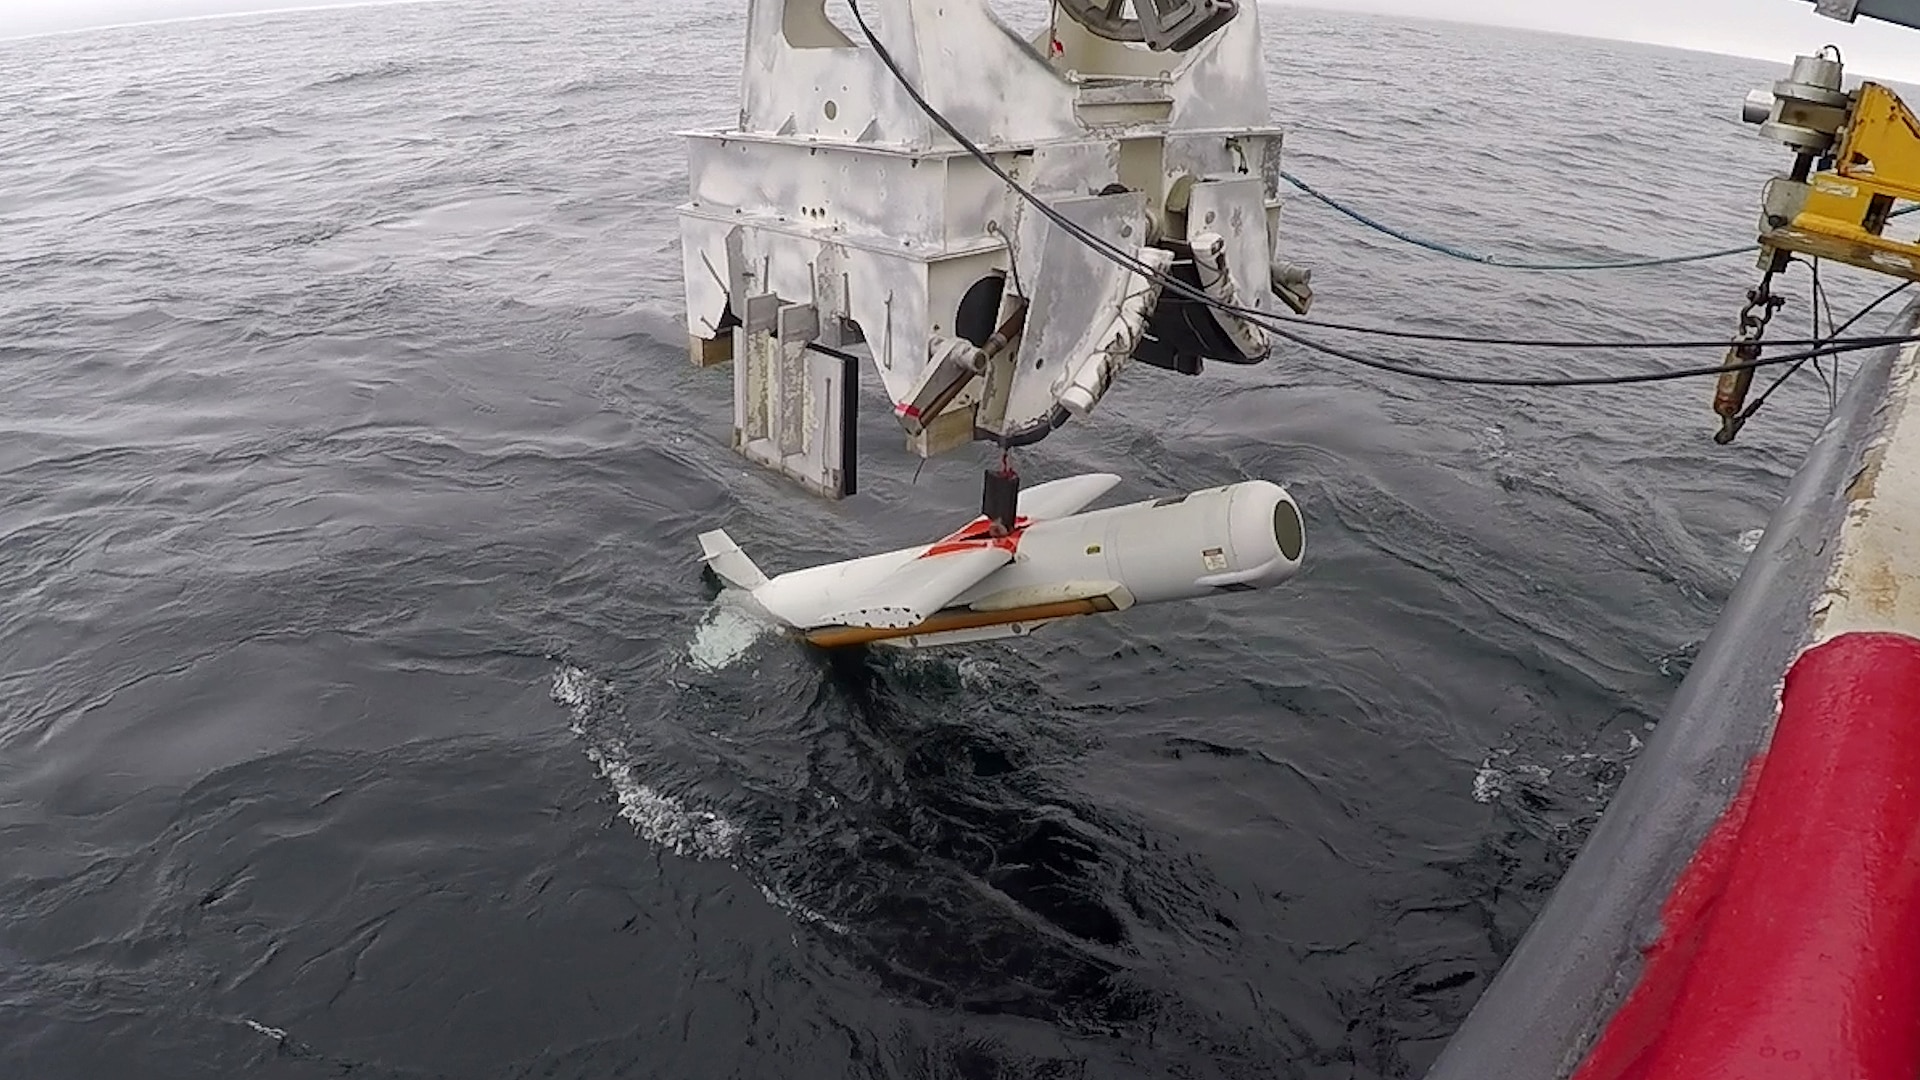 The AN/AQS-20C towed mine-hunting sonar is streamed into Gulf of Mexico waters of the Naval Surface Warfare Center Panama City Division, Florida. Gulf test range. Developmental Testing was completed on Feb. 12, 2019. The testing marks completion of incorporating the Charlie variant sonar sensor modernization.